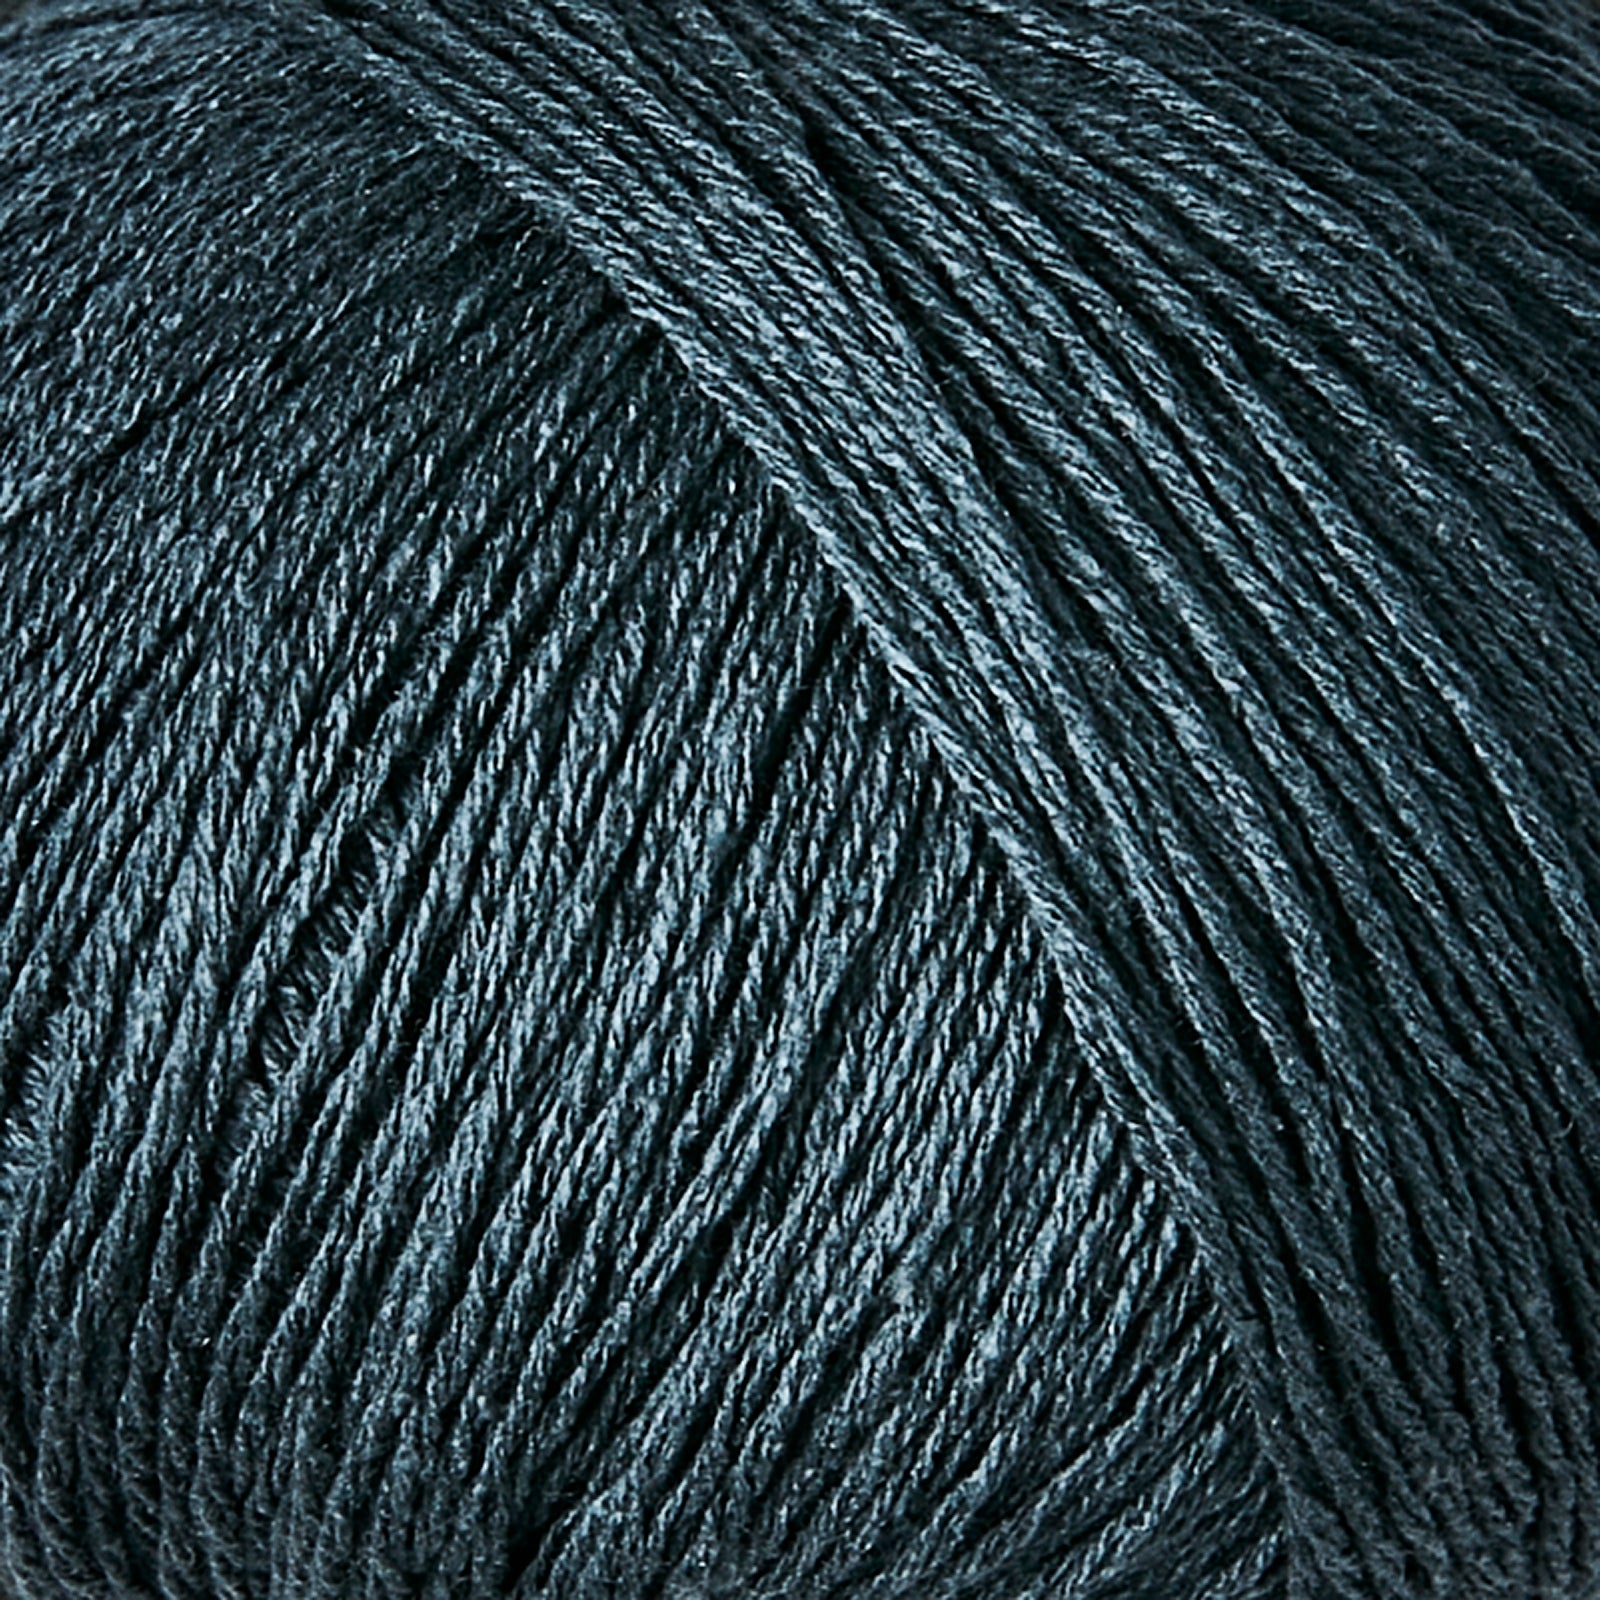 Knitting for Olive Pure Silk - Deep Petroleum Blue